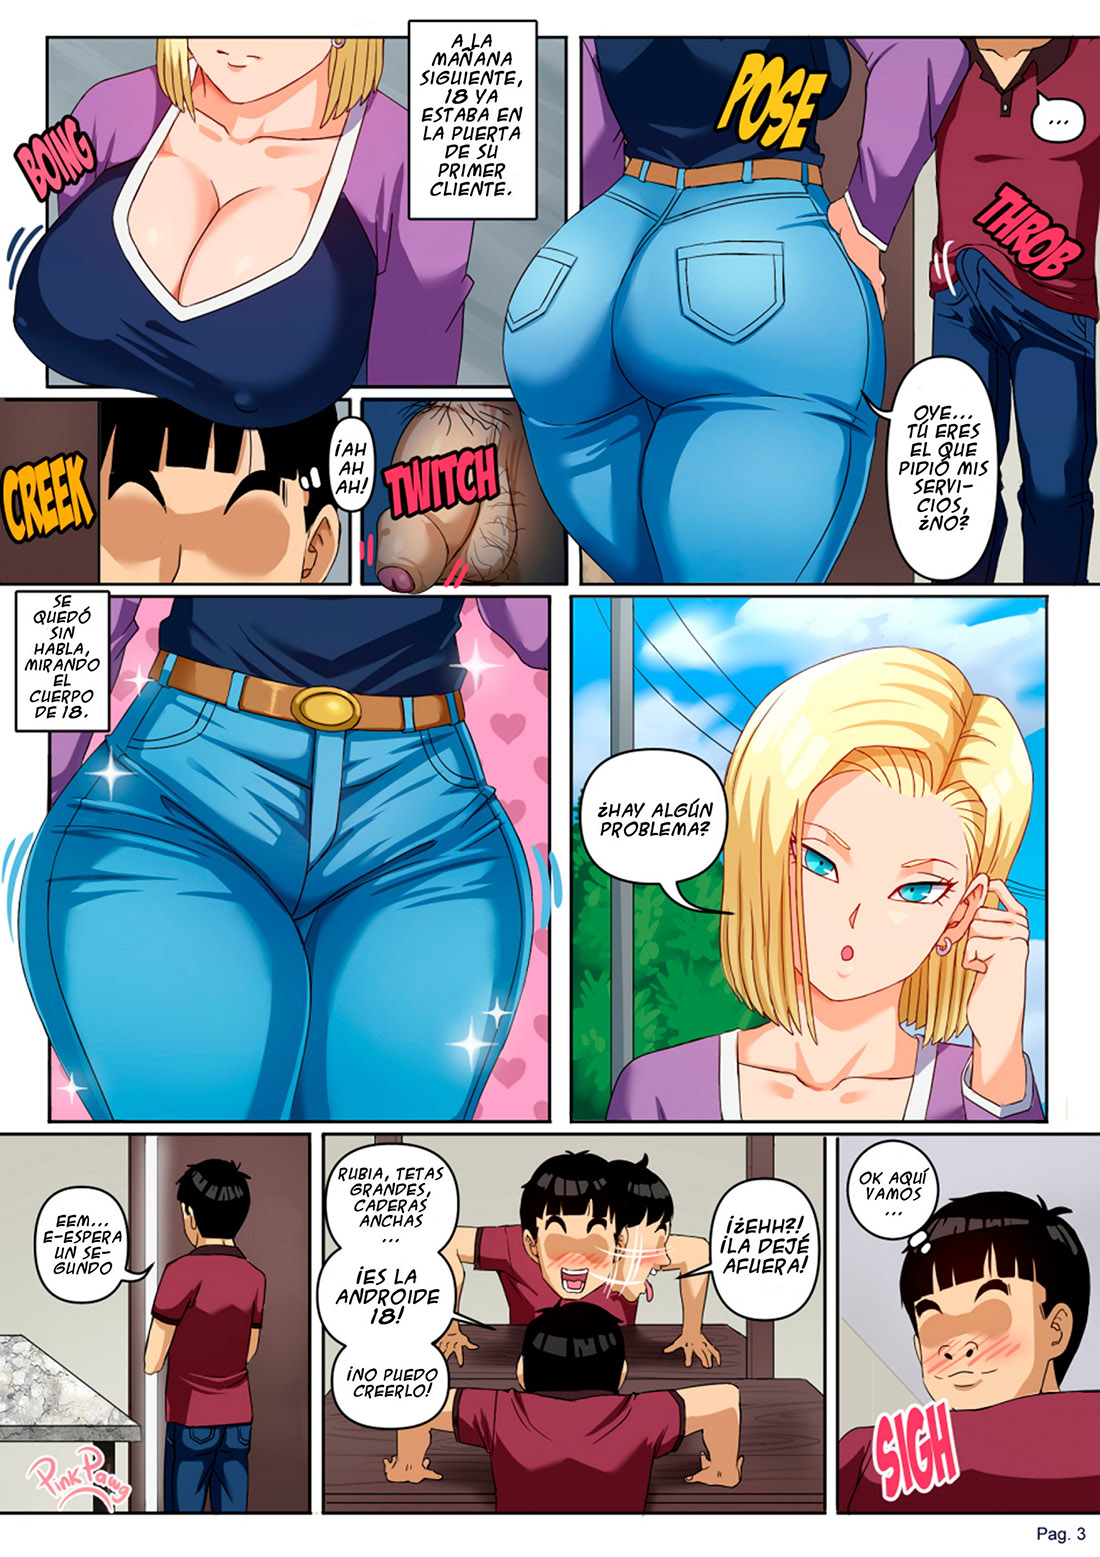 ANDROID 18 NTR parte 3